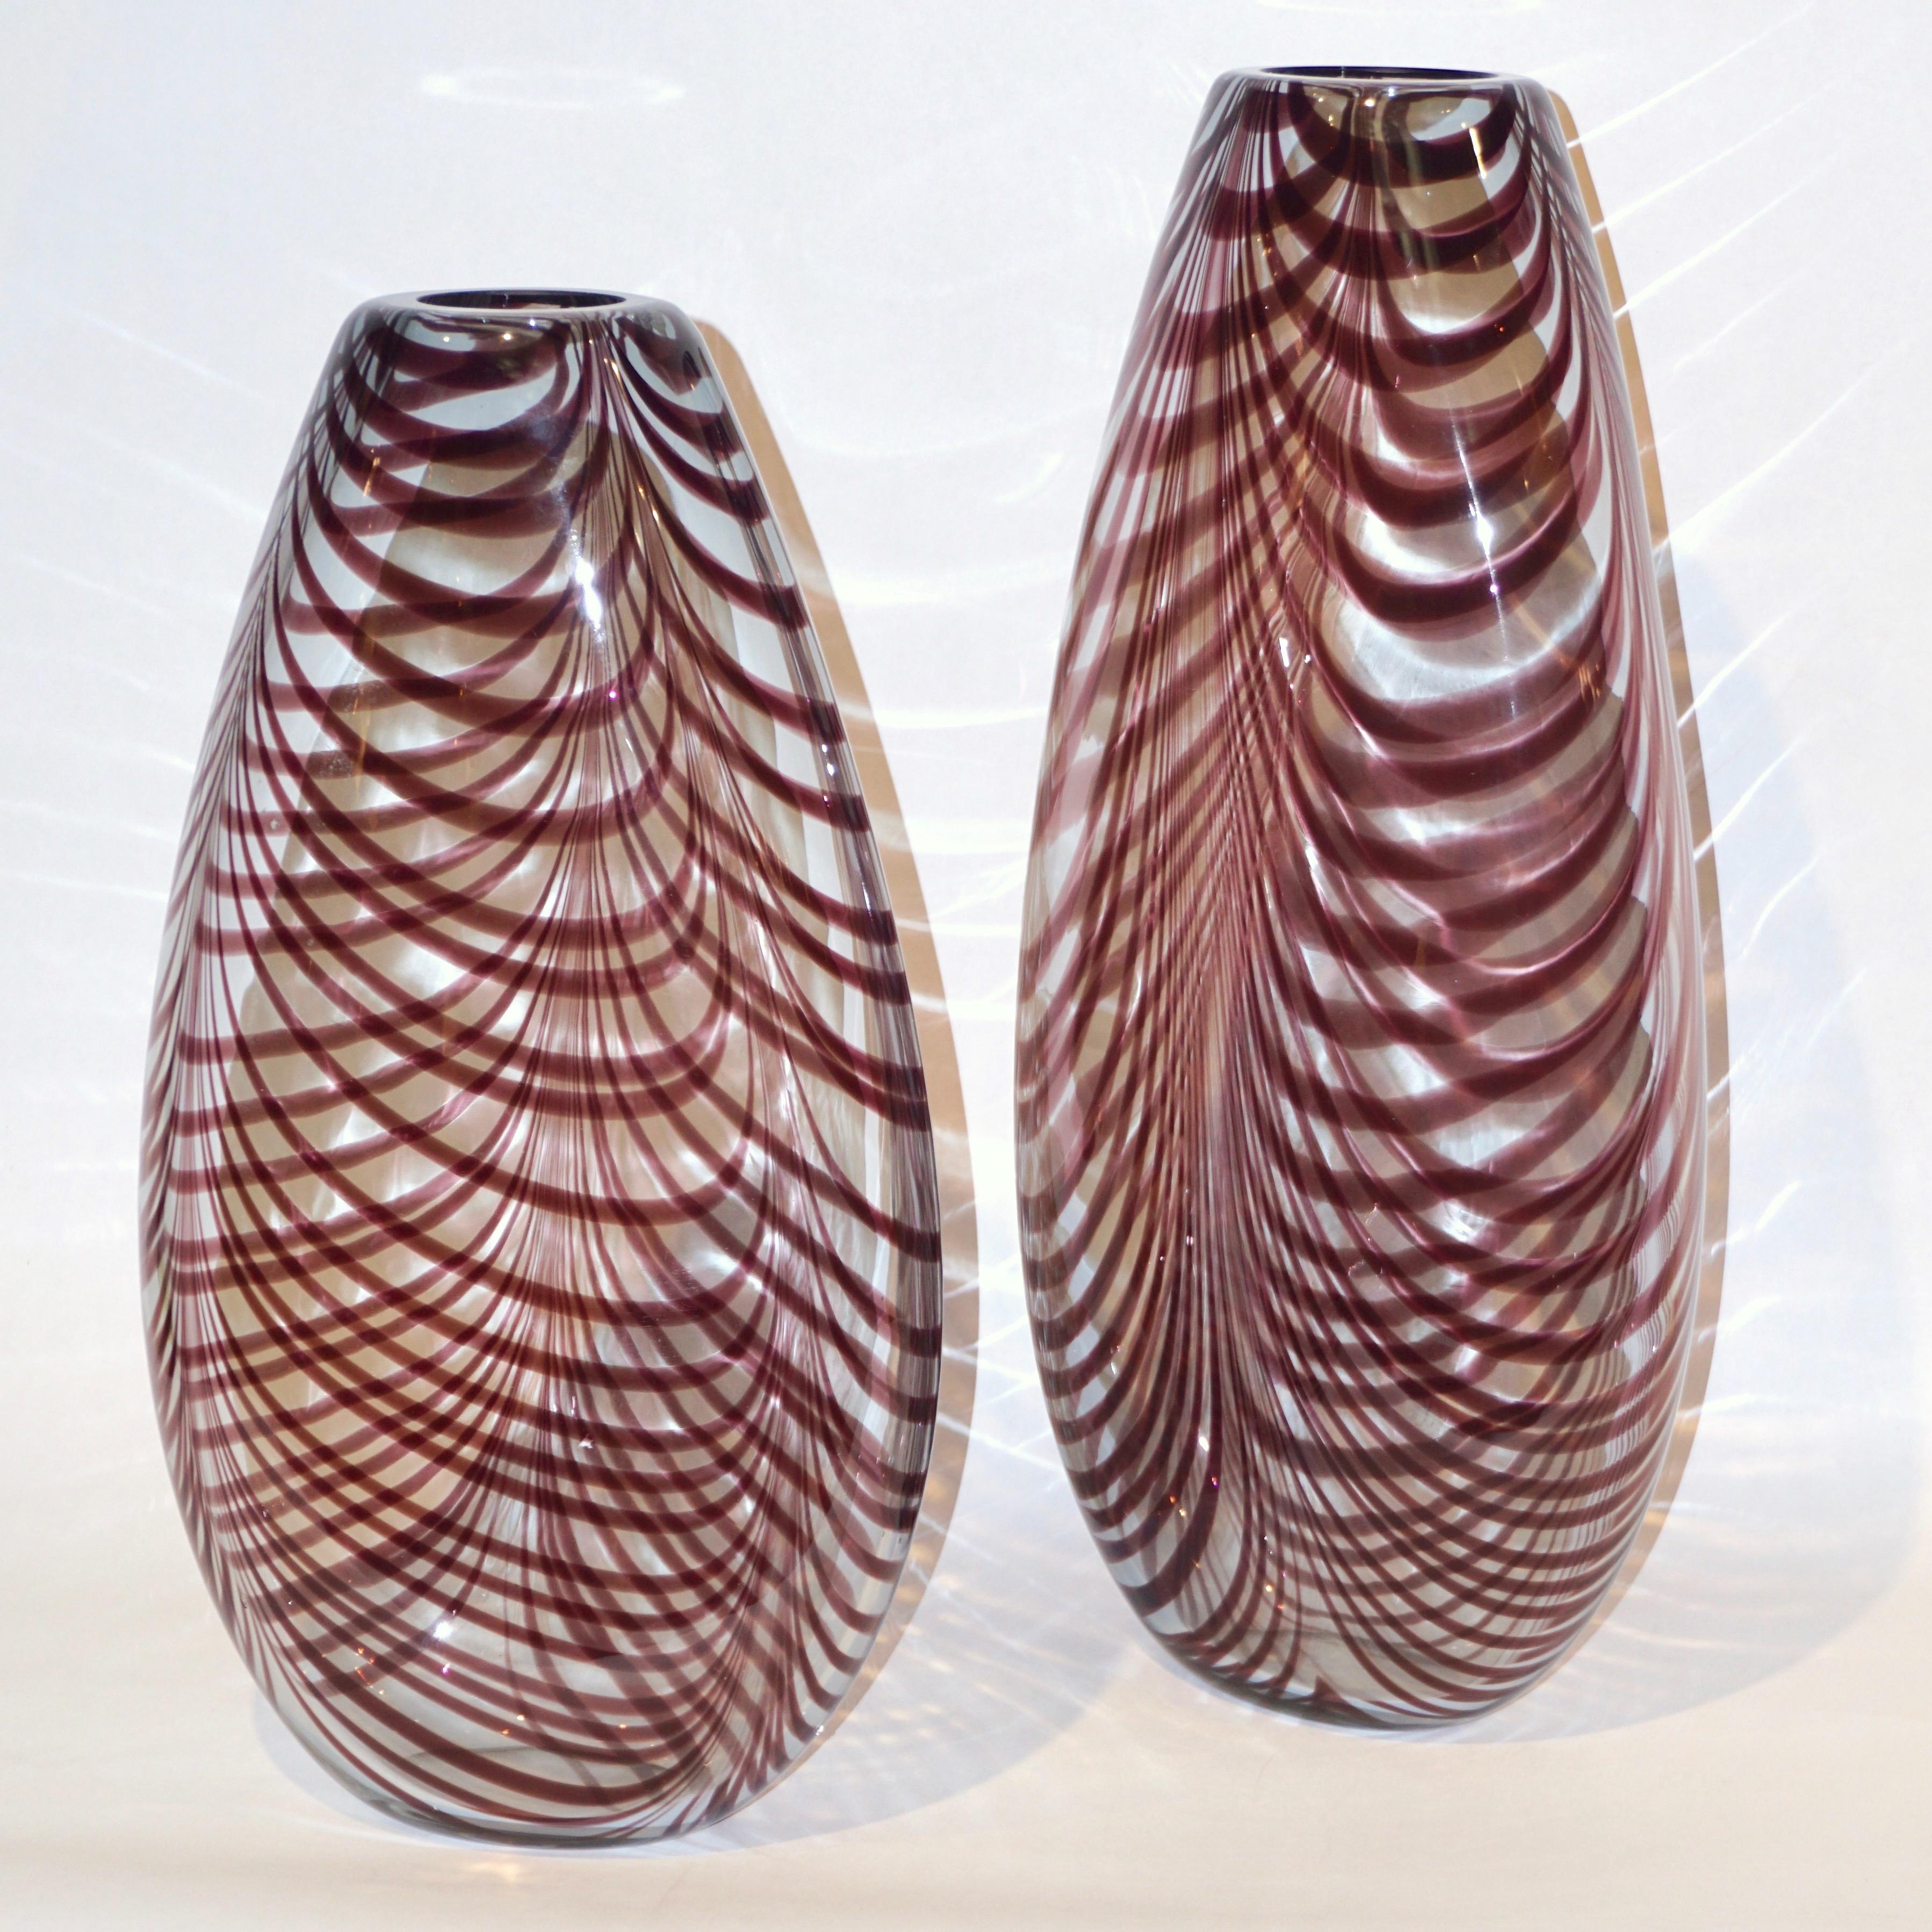 Organic Modern Formia 1970s Two Feather Decorated Purple Brown Crystal Murano Art Glass Vases For Sale